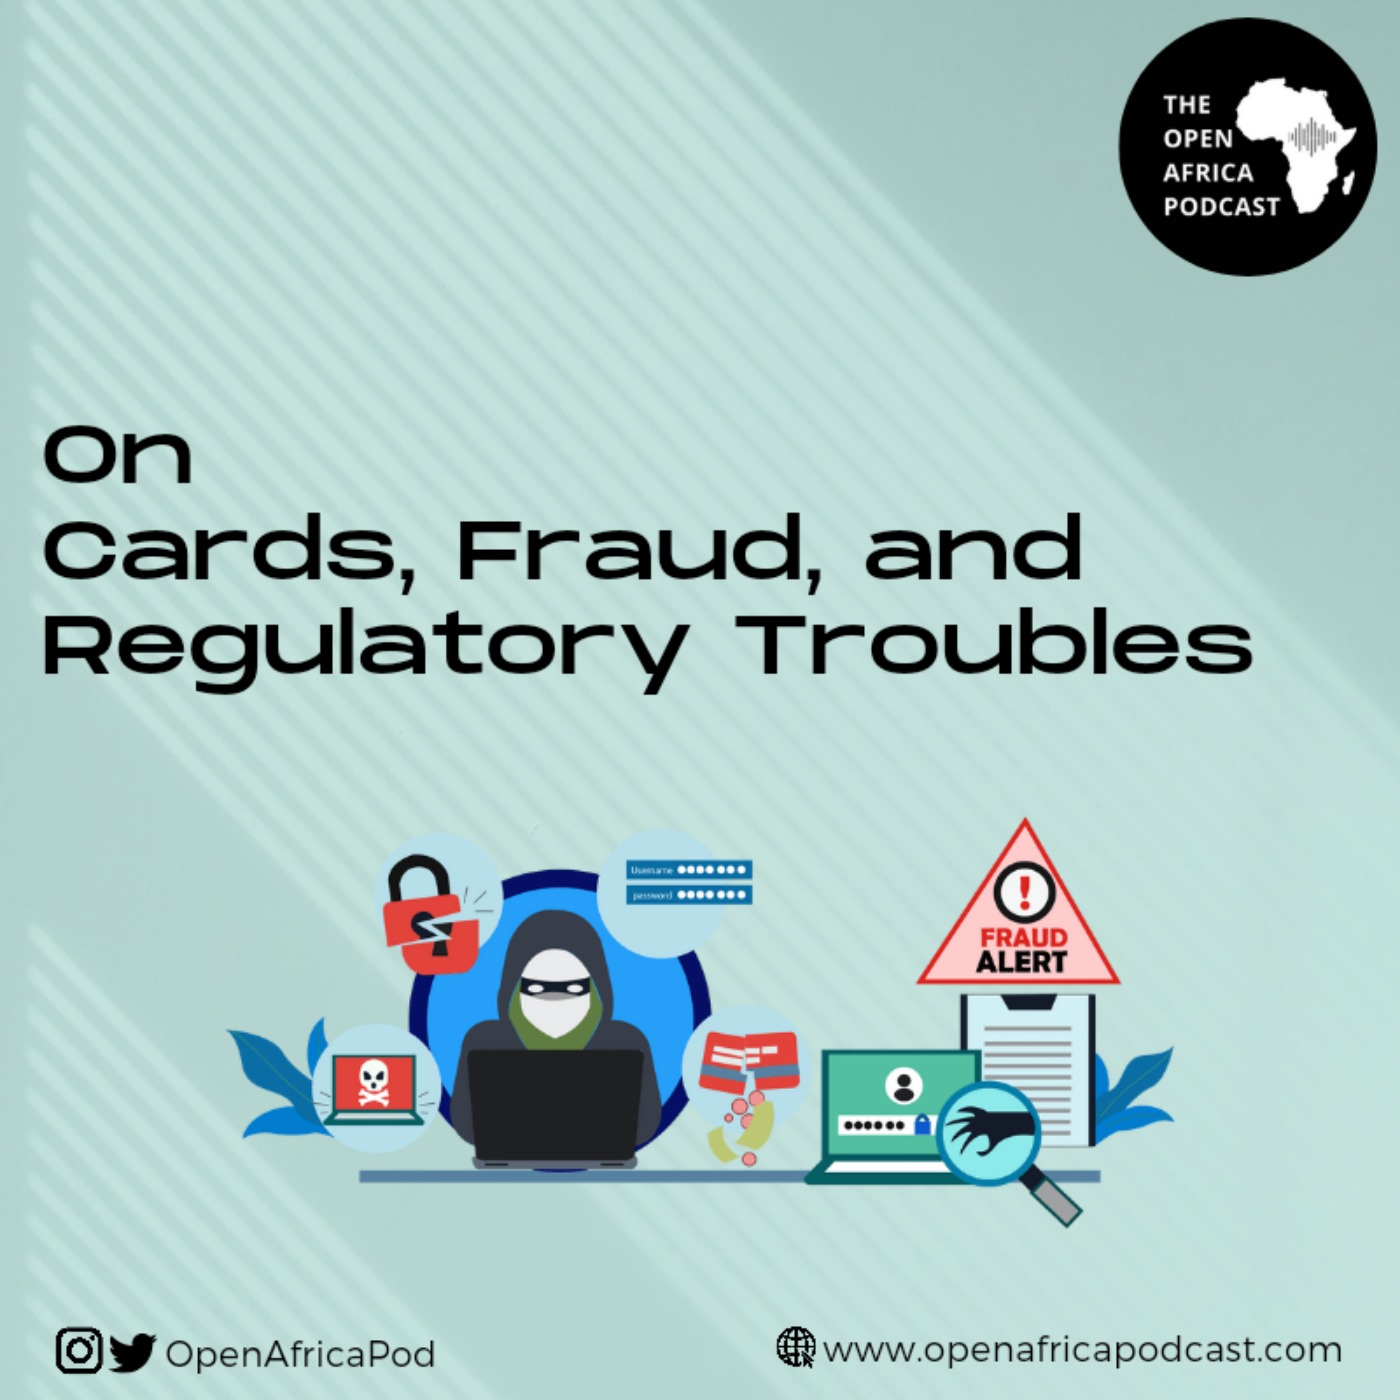 On Cards, Fraud, and Regulatory troubles